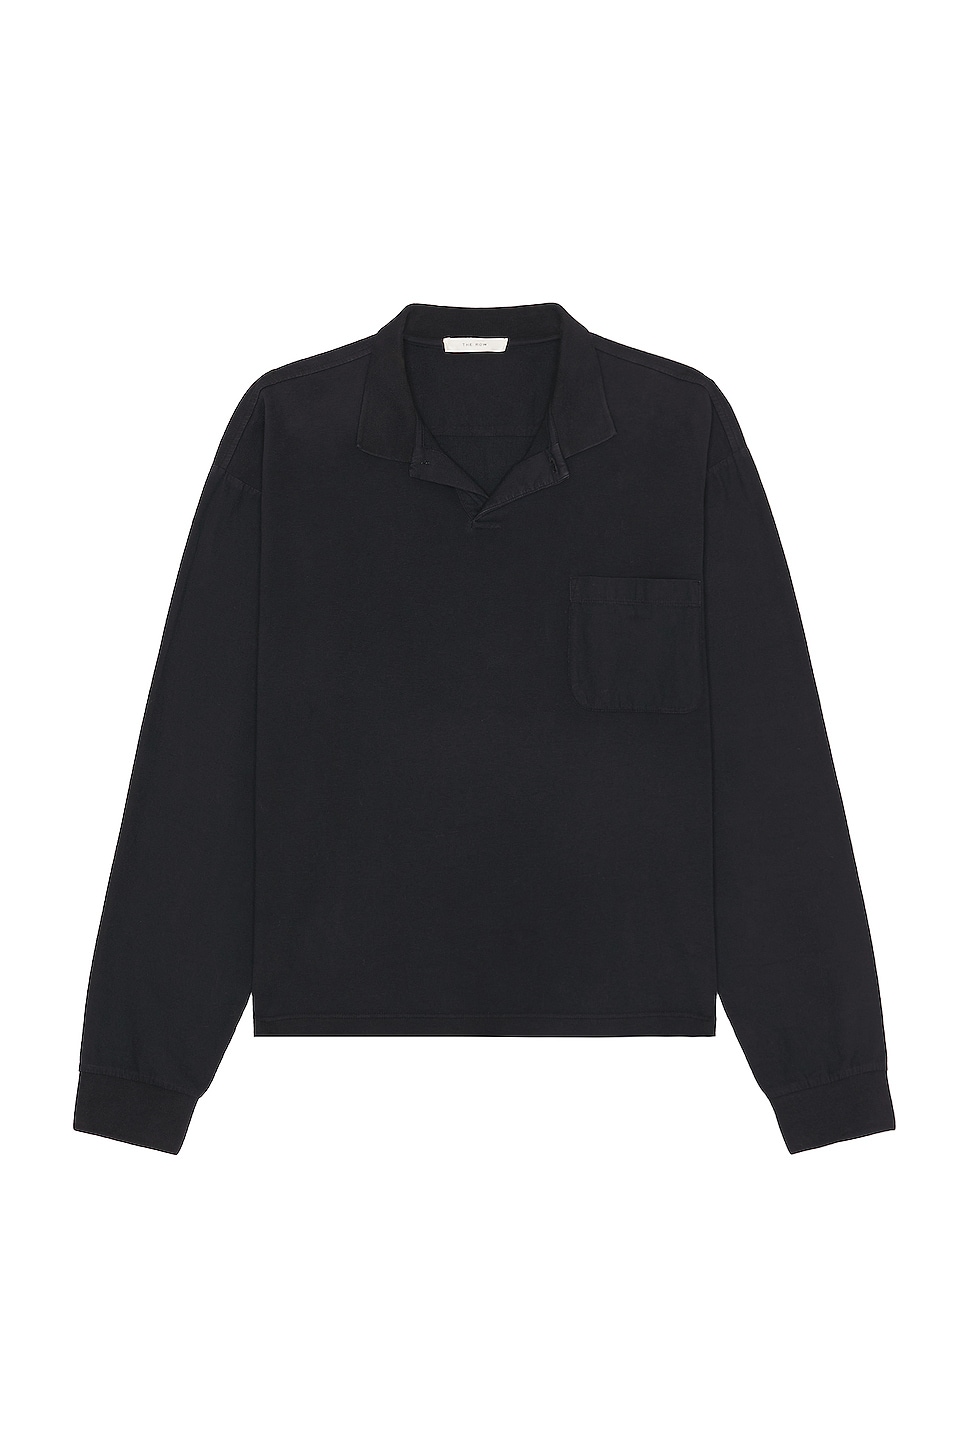 Image 1 of The Row Wrenley Top in Black